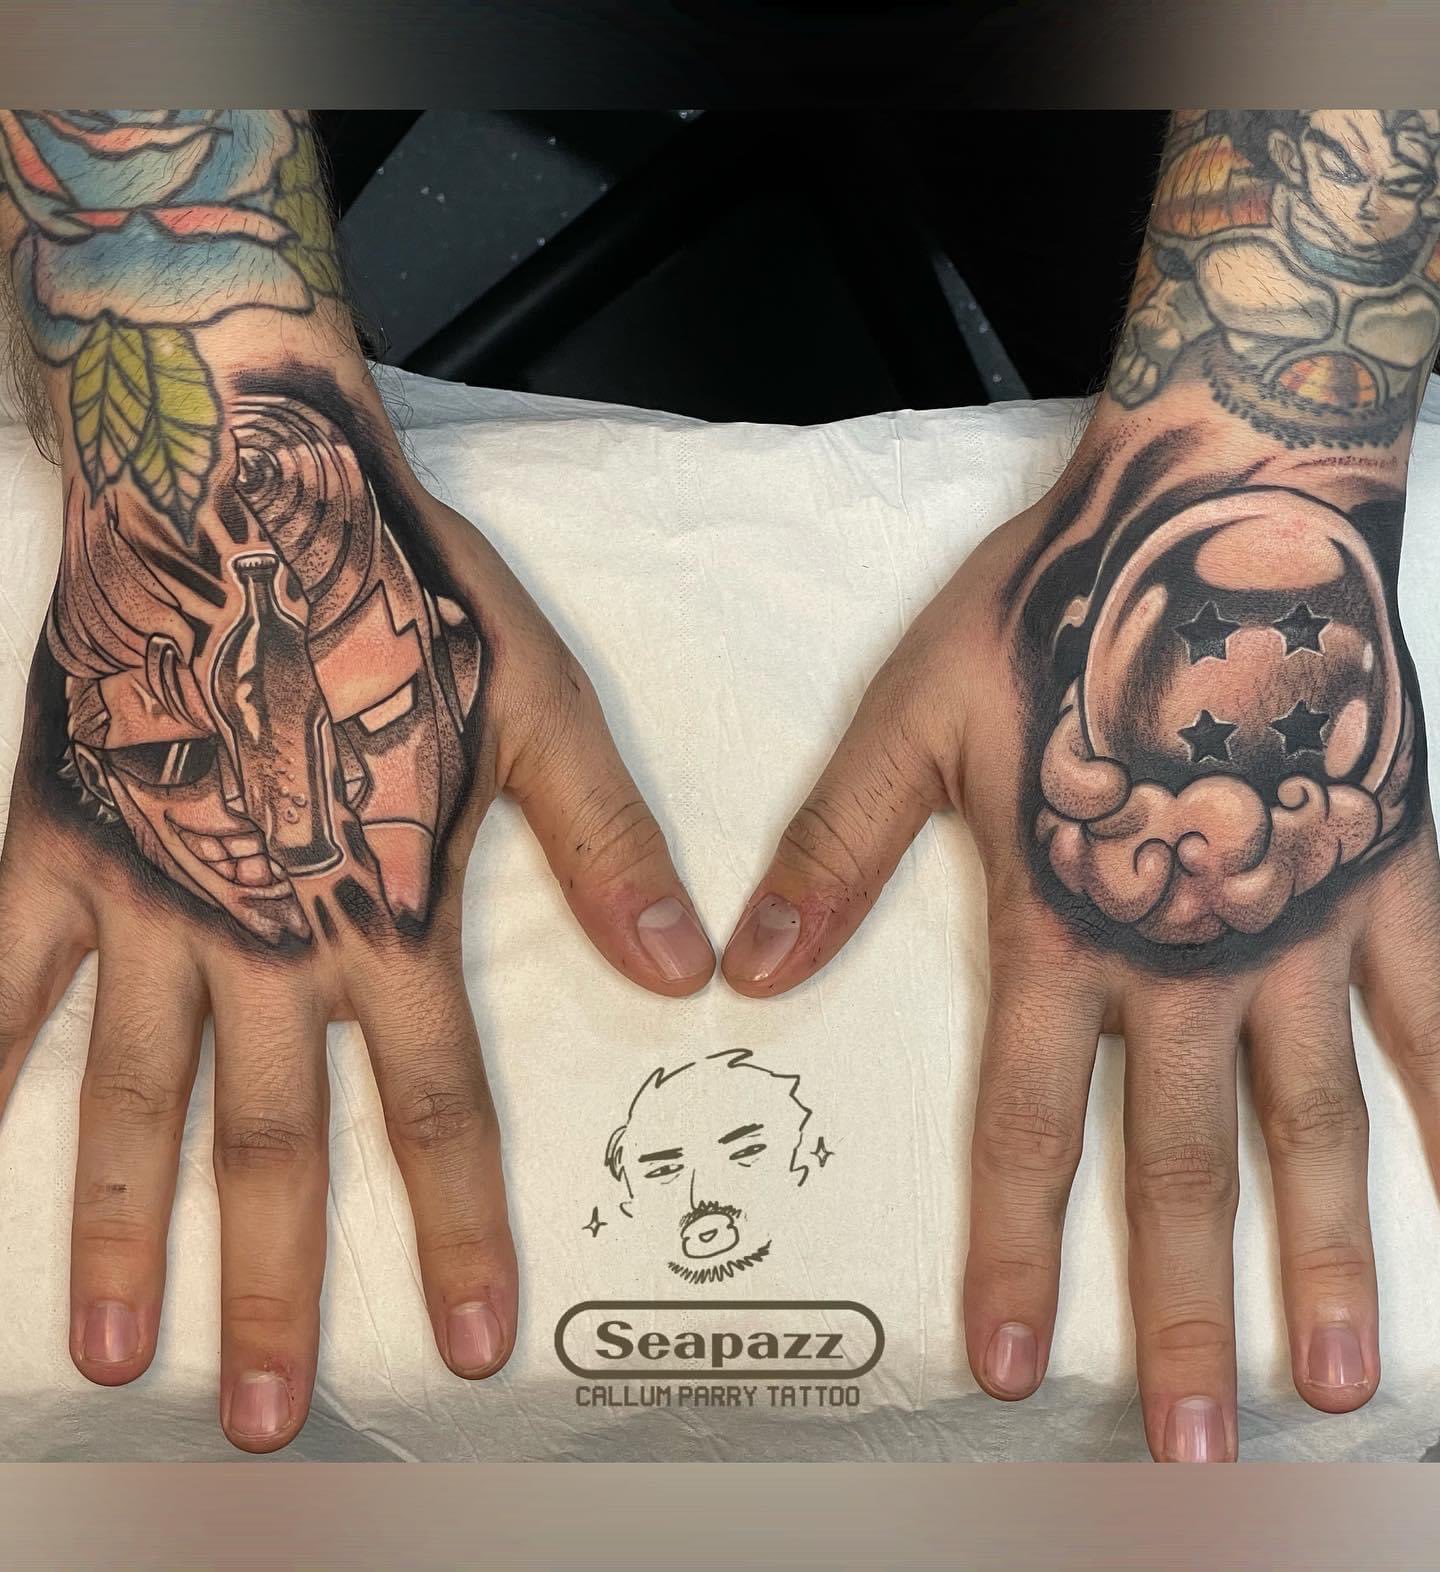 Why You Should Think Twice Before Getting Hand Tattoos